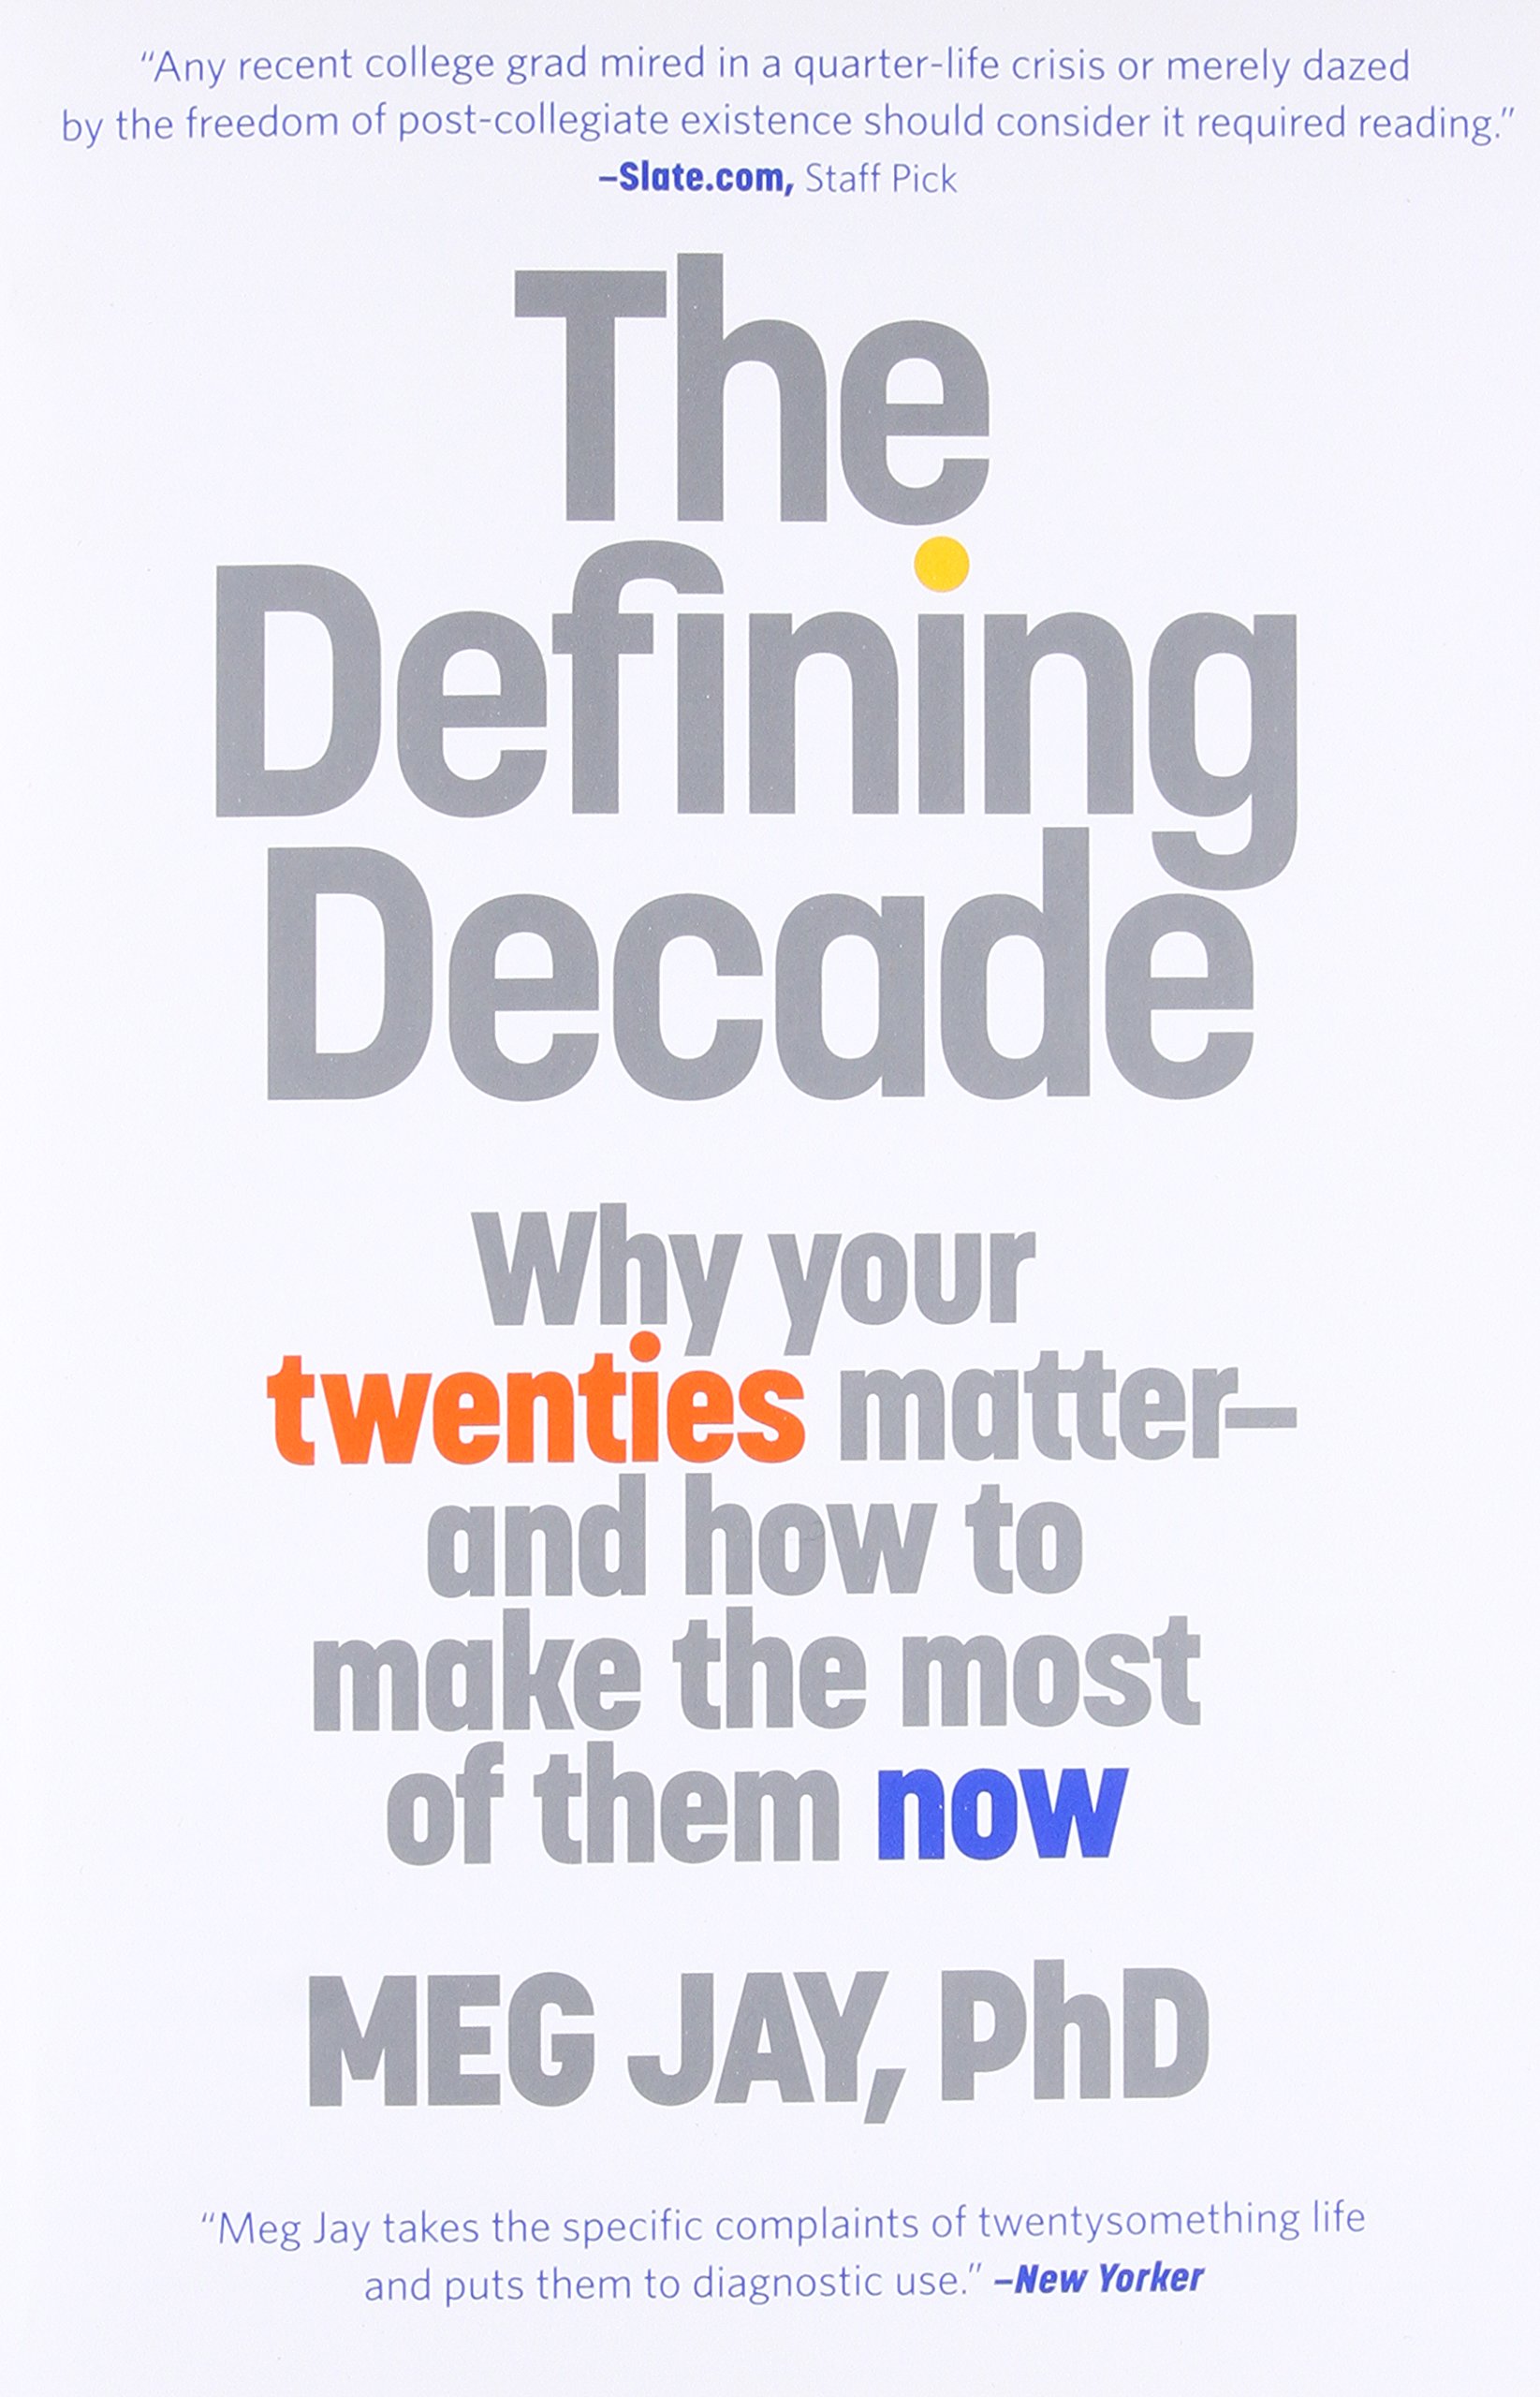 Book Cover The Defining Decade: Why Your Twenties Matter--And How to Make the Most of Them Now